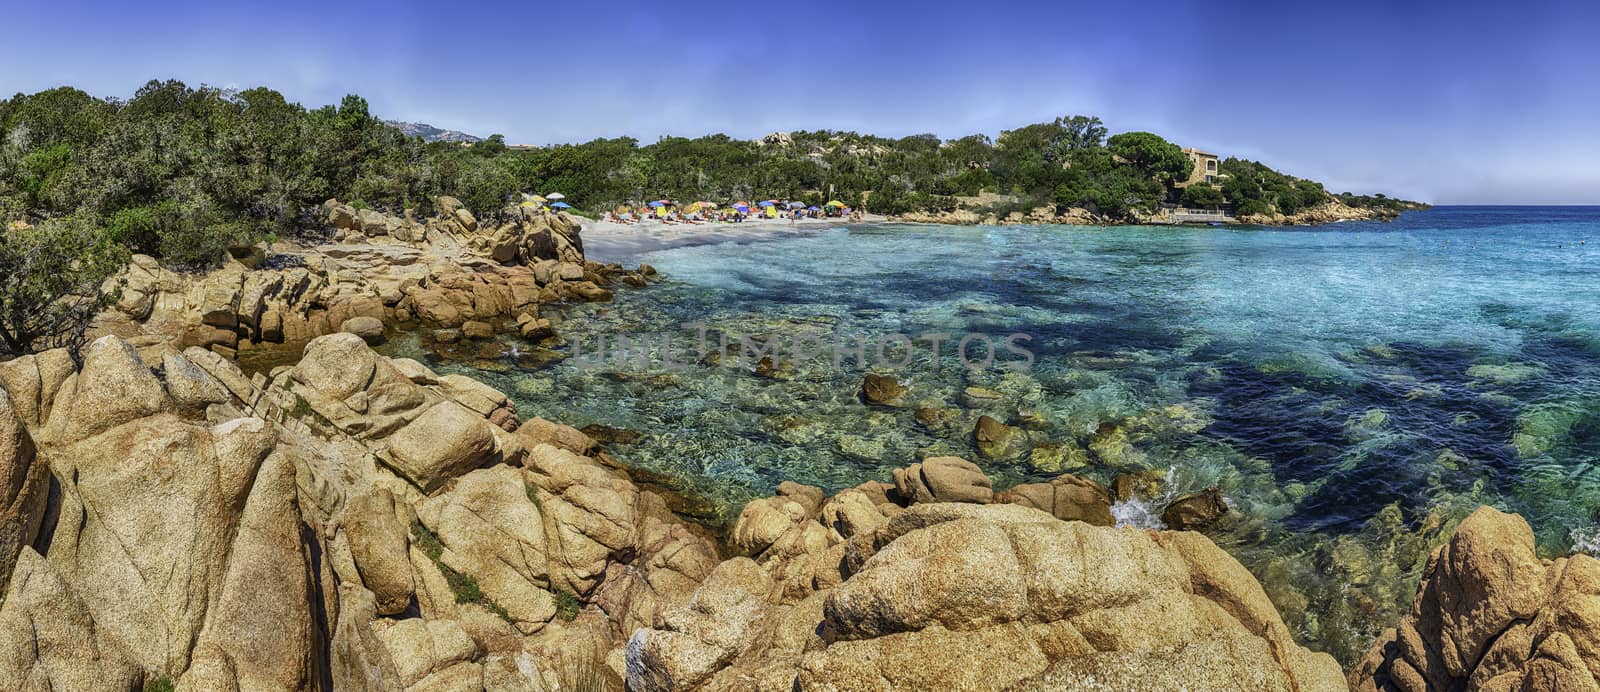 Panoramic view over the enchanting beach of Capriccioli, one of the most beautiful seaside places in Costa Smeralda, northern Sardinia, Italy